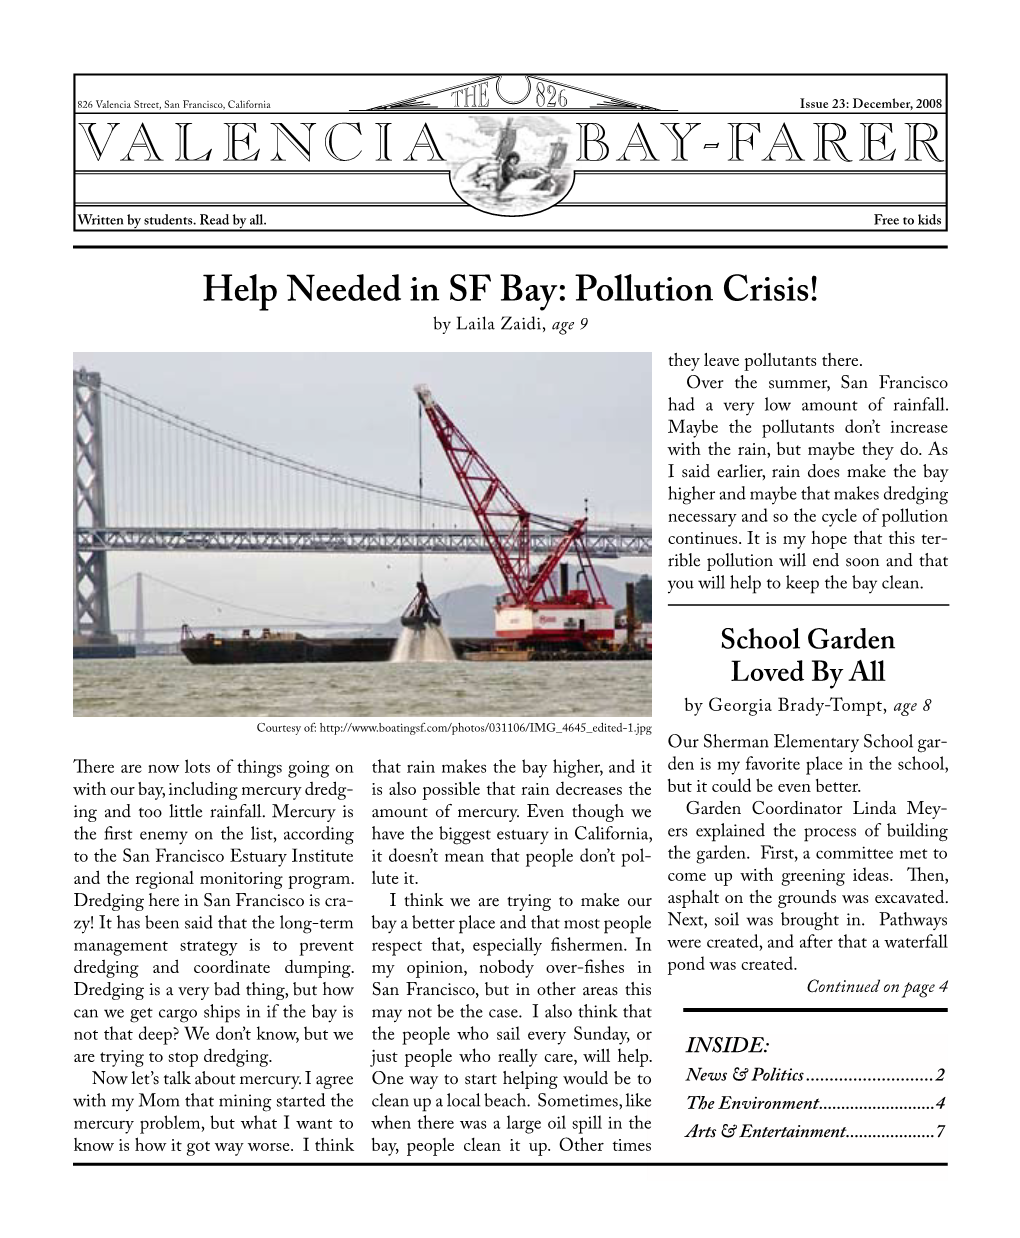 Help Needed in SF Bay: Pollution Crisis! by Laila Zaidi, Age 9